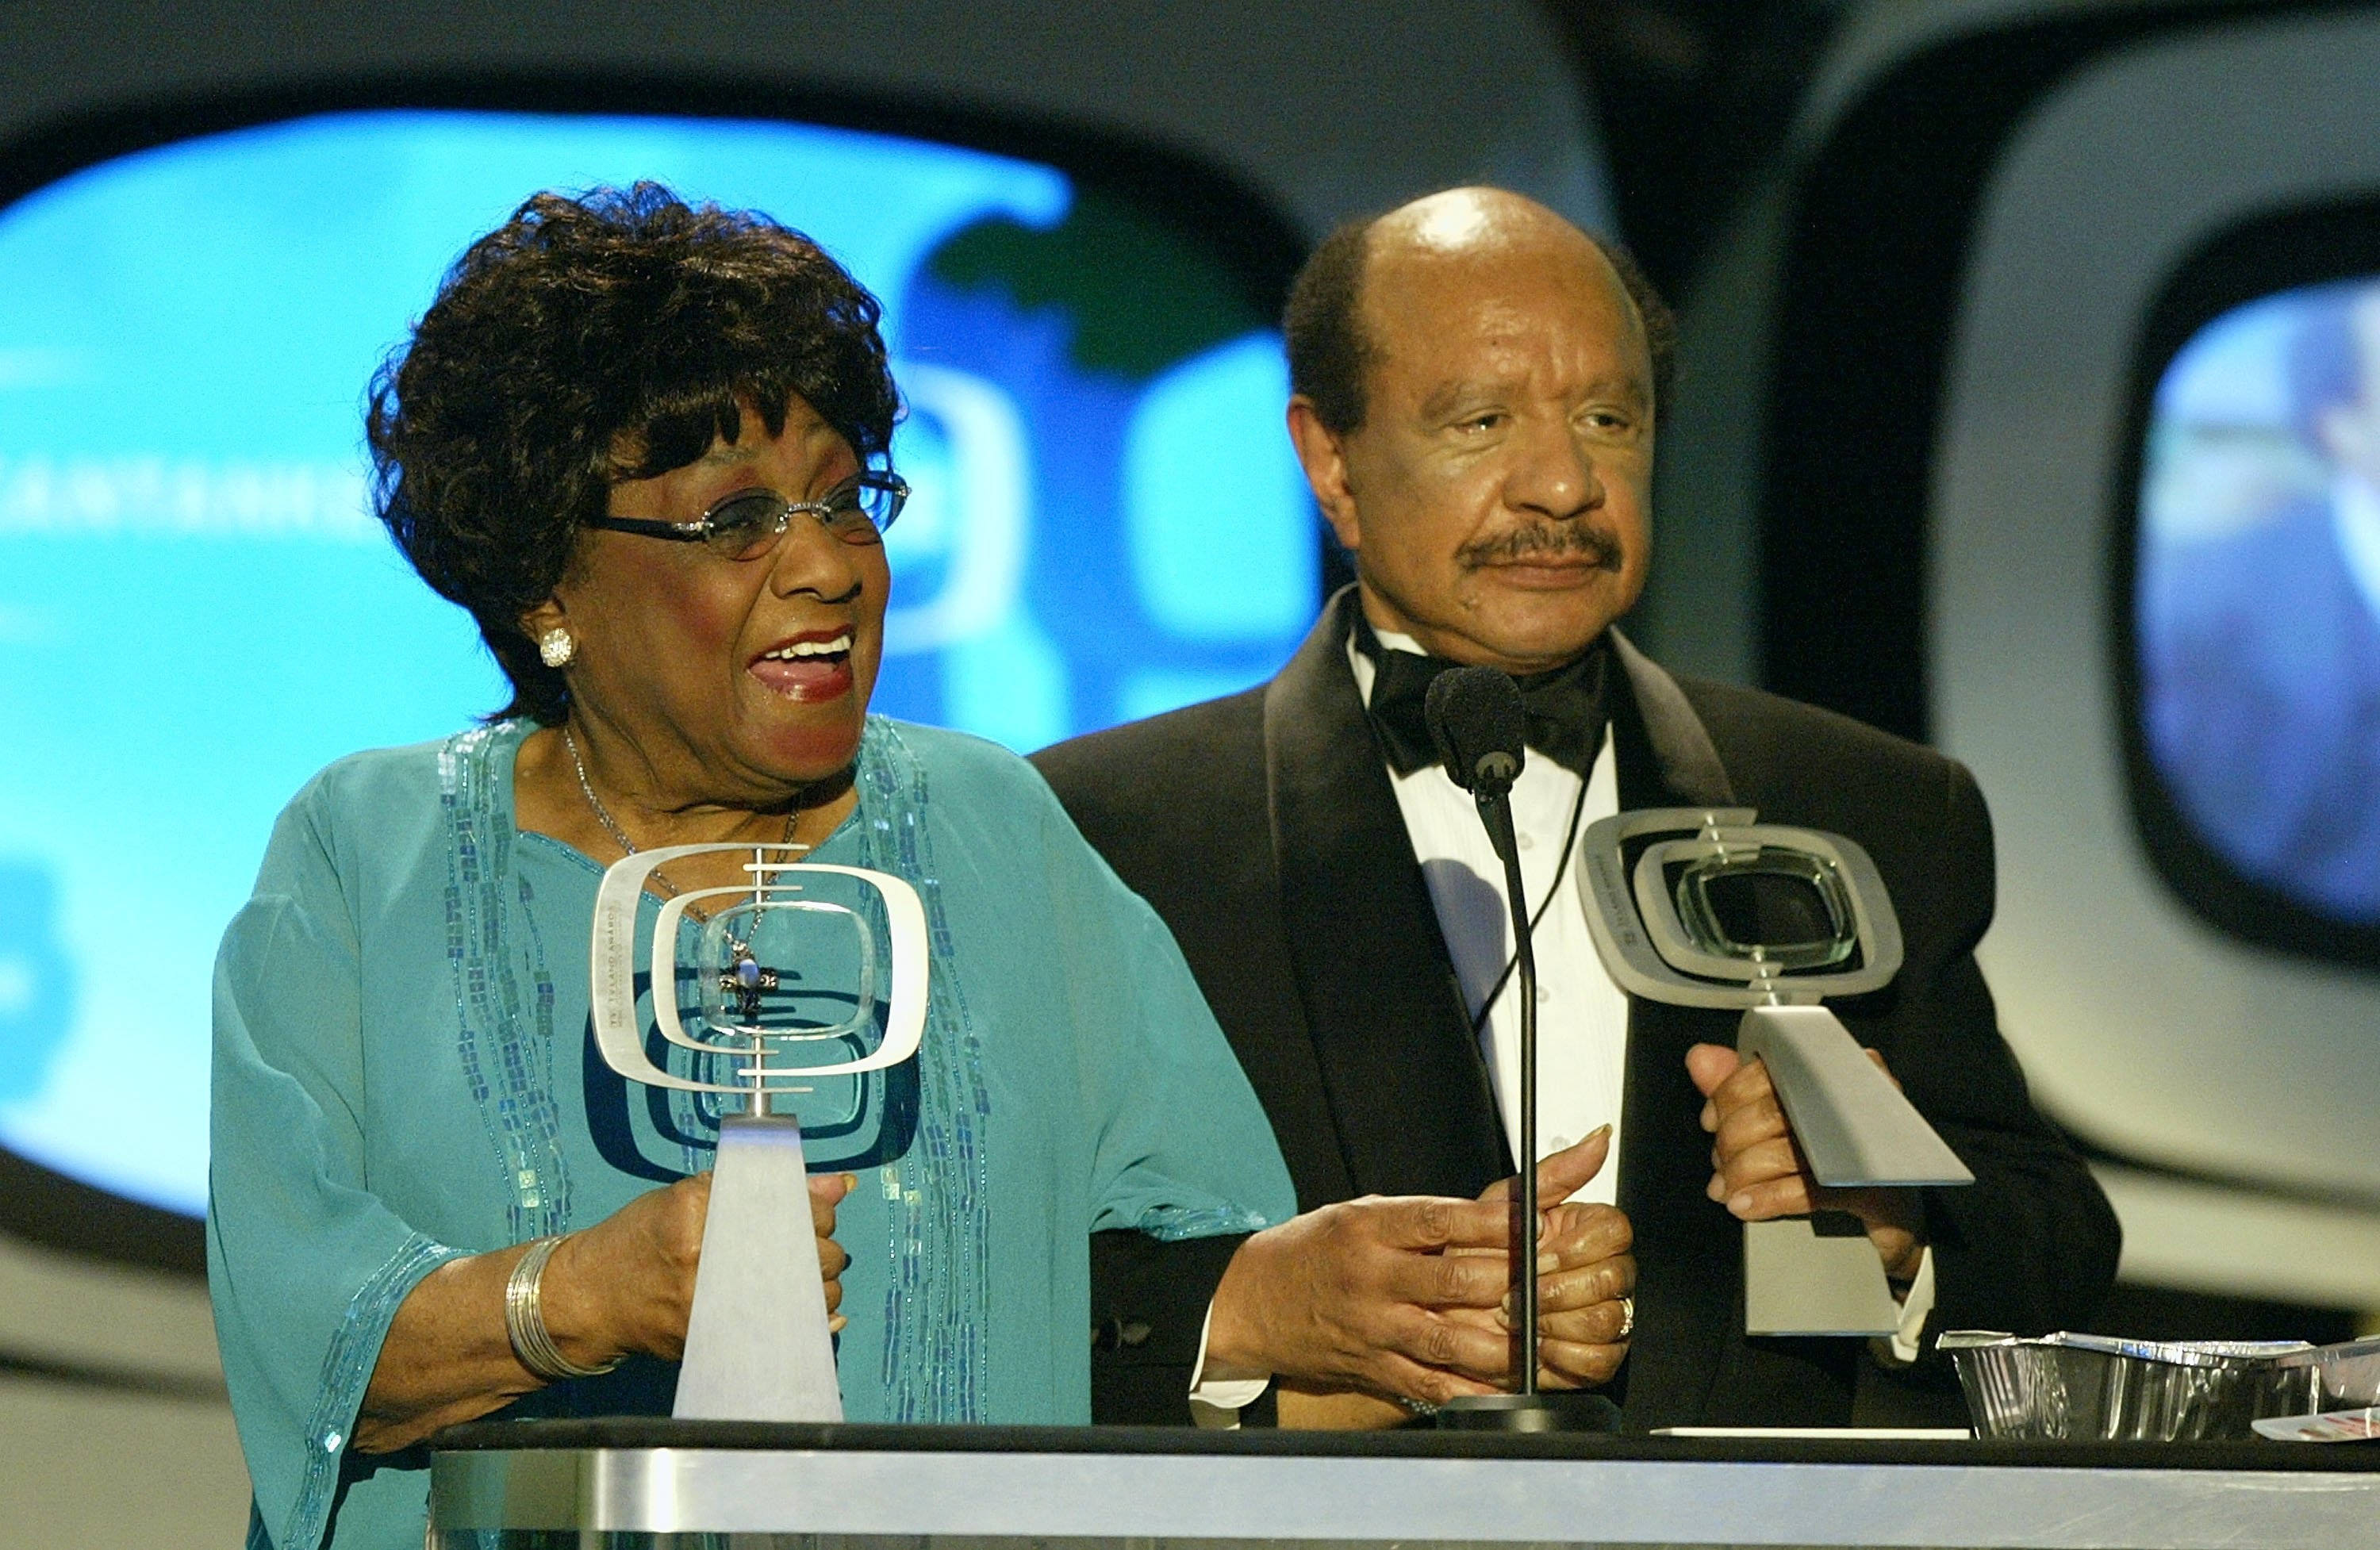 Actress Isabel Sanford (L) and Actor Sherman Hemsley speak at the 2nd annual TV Land Awards in Hollywood, California. | Source: Kevin Winter/Getty Images